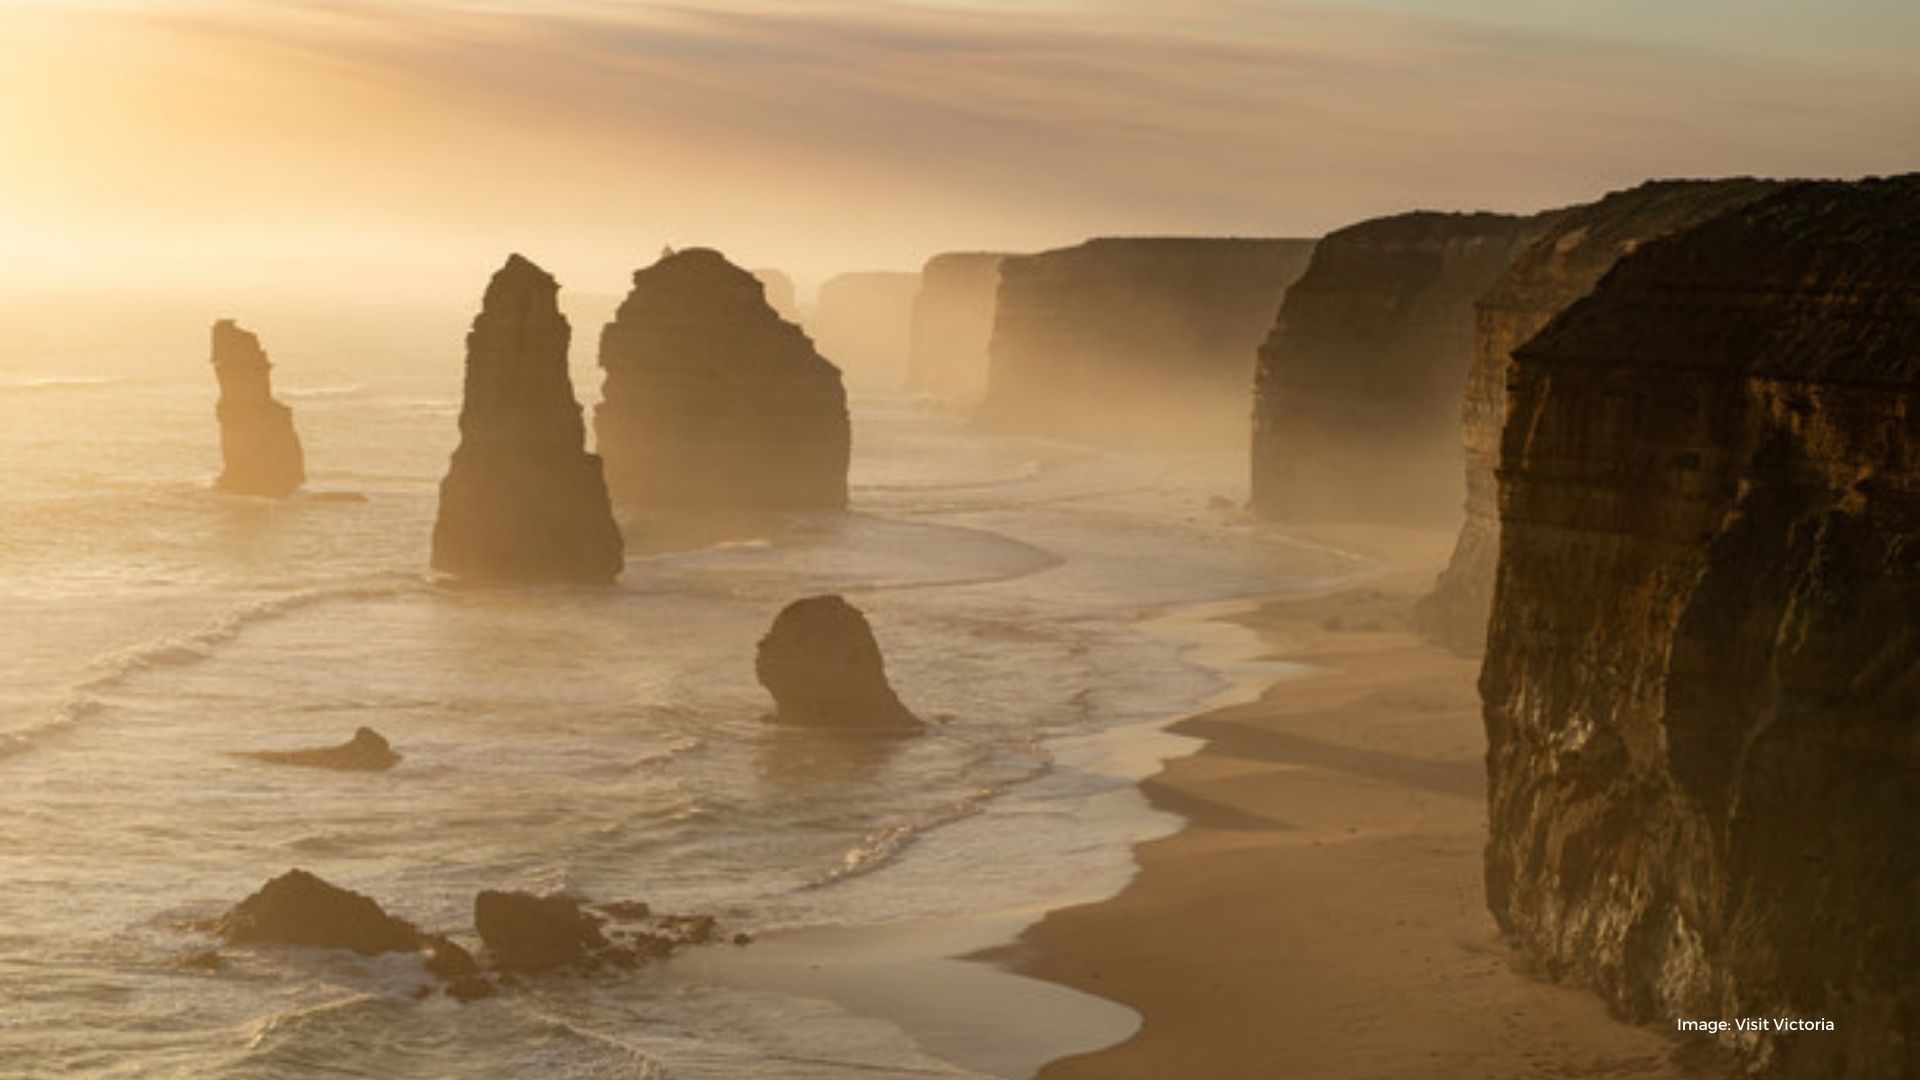 Limestone stacks rising from ocean next to dramatic cliff coastline